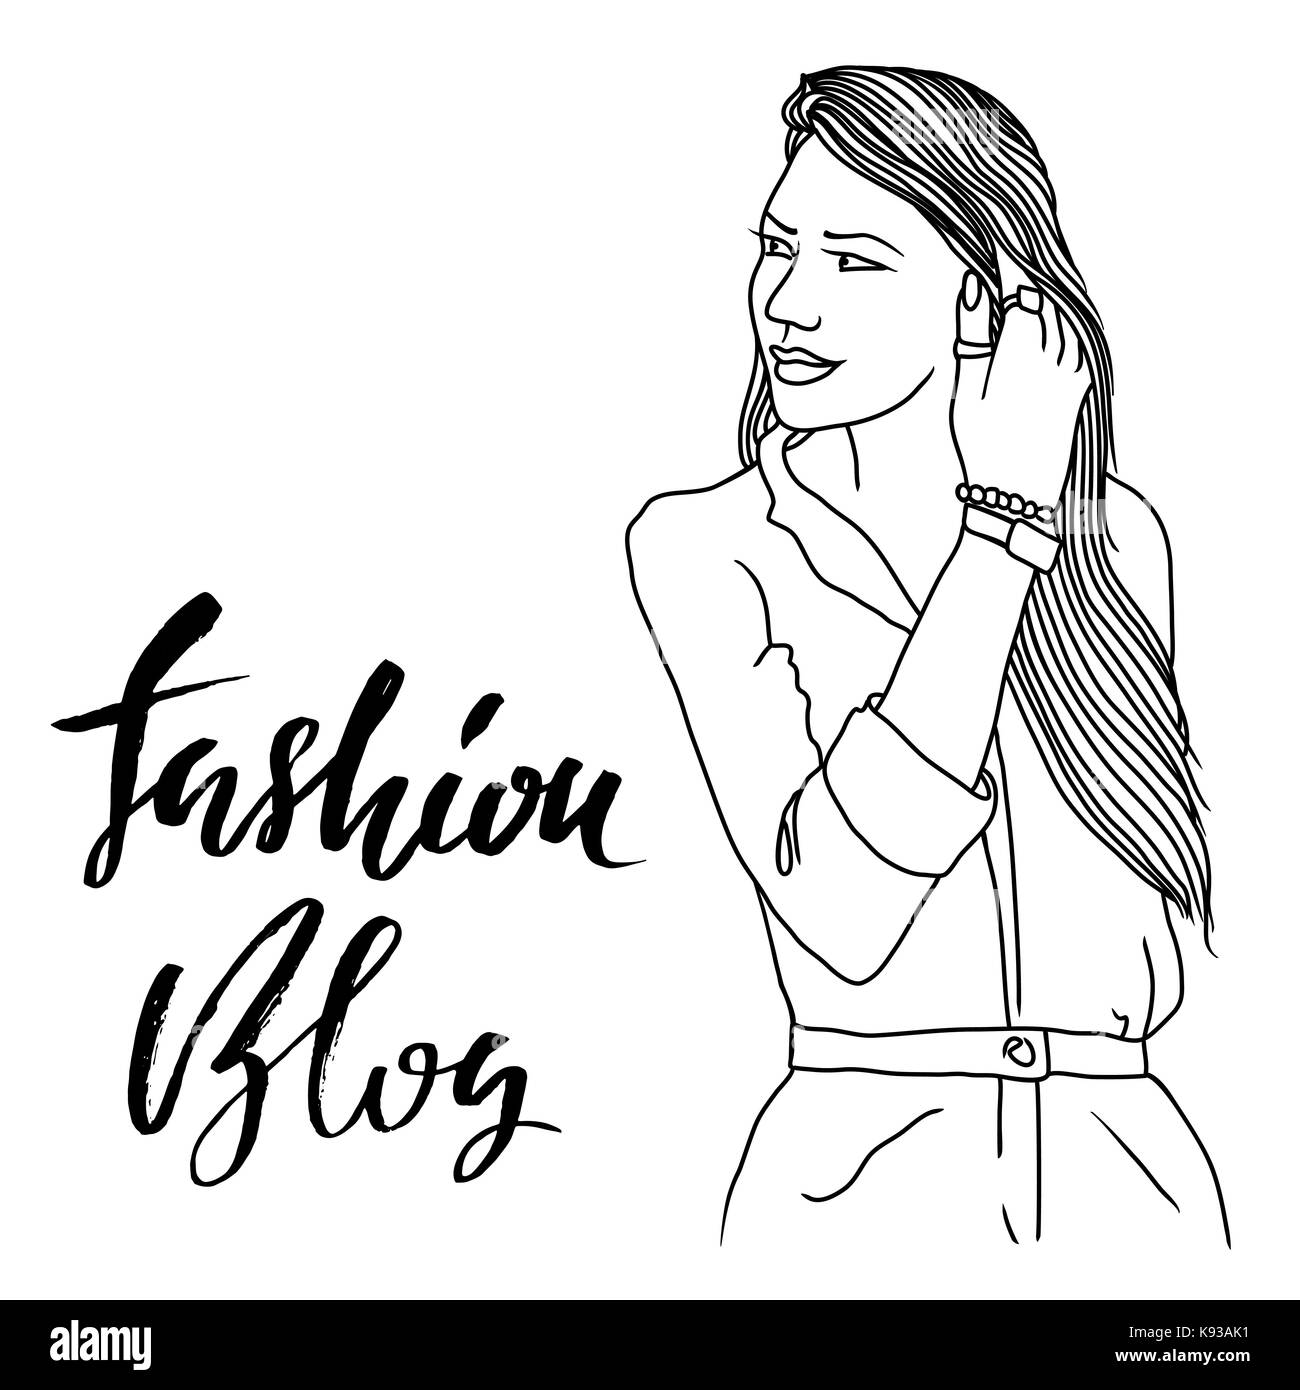 Cute vector girl illustration. Woman with long hair. Fashion blog modern brush lettering. Black and white sketch. Stock Vector